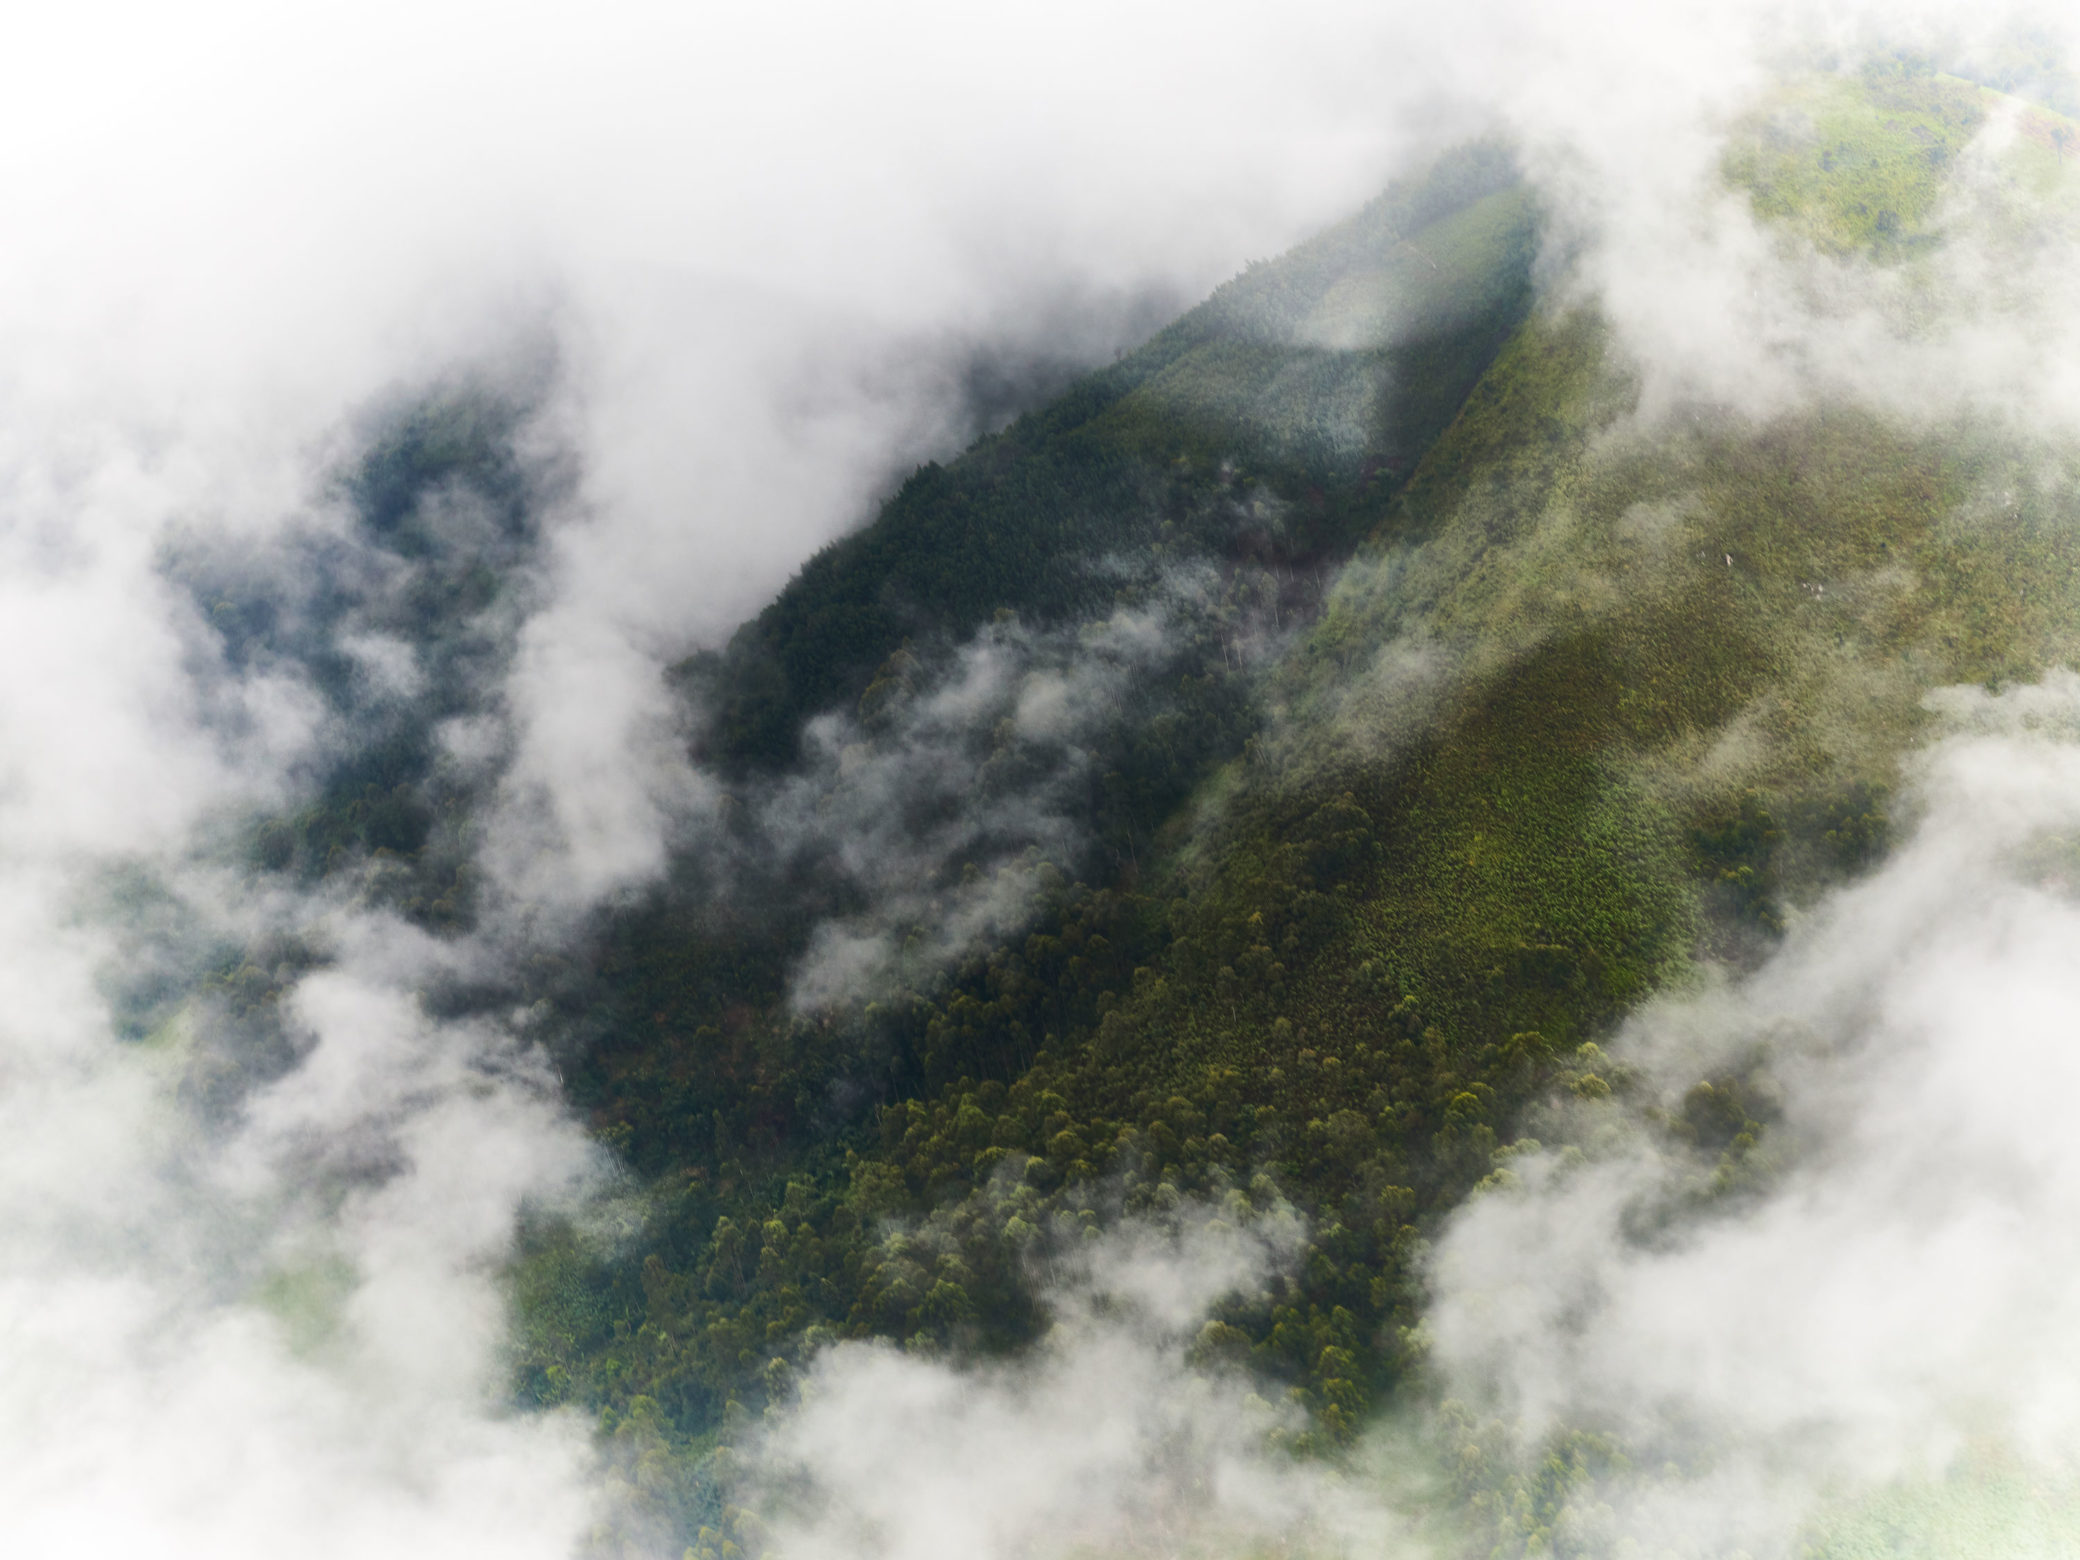 An image of clouds over the rainforest